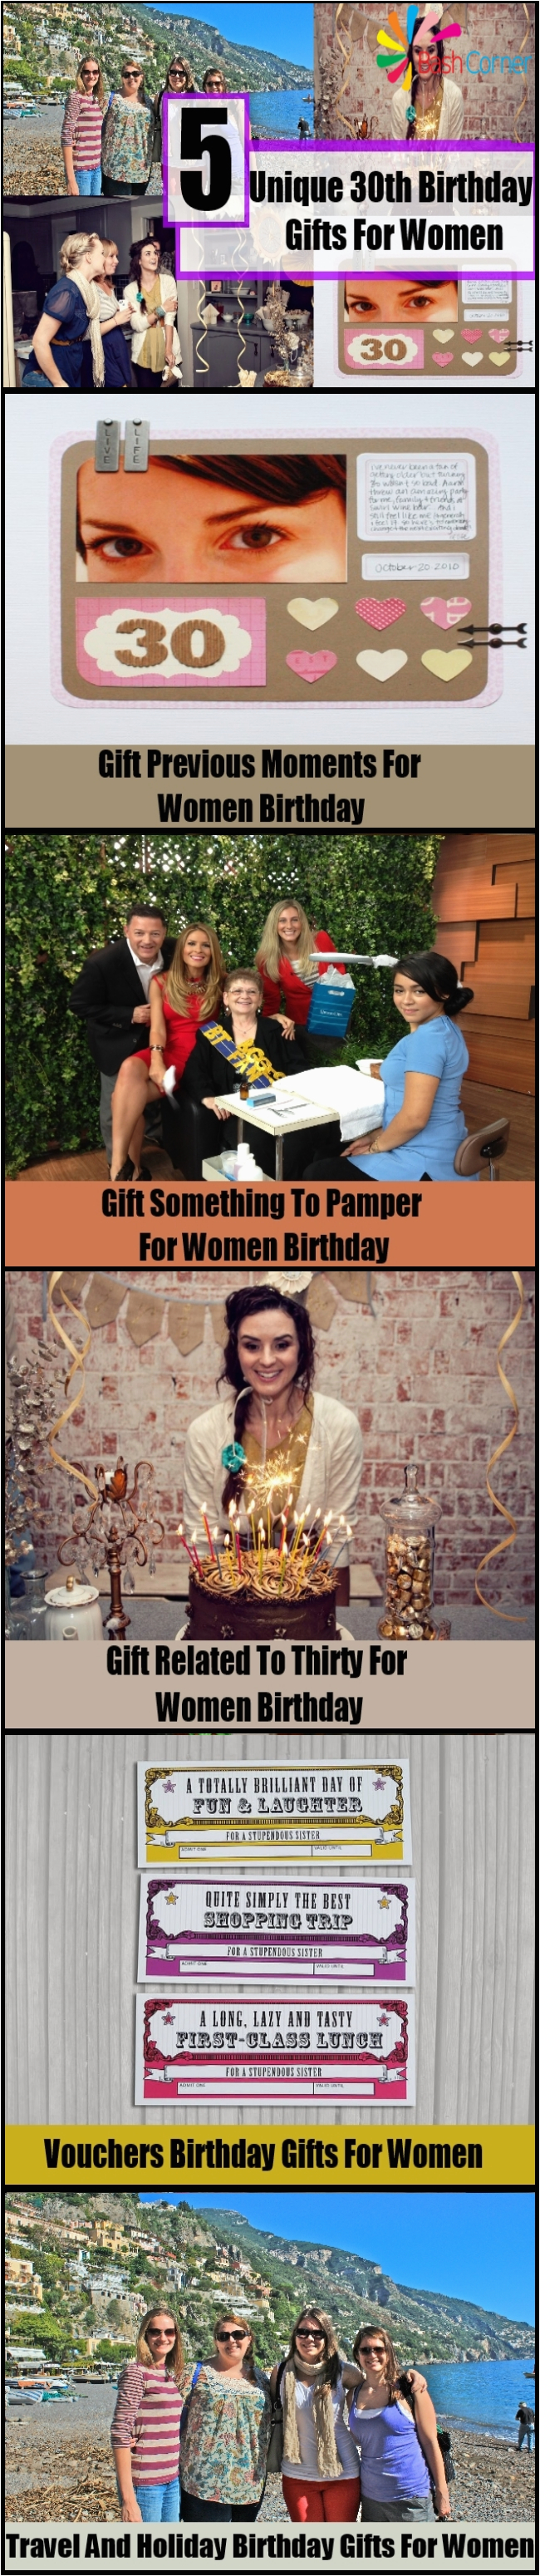 unique 30th birthday gifts for women gift ideas for a